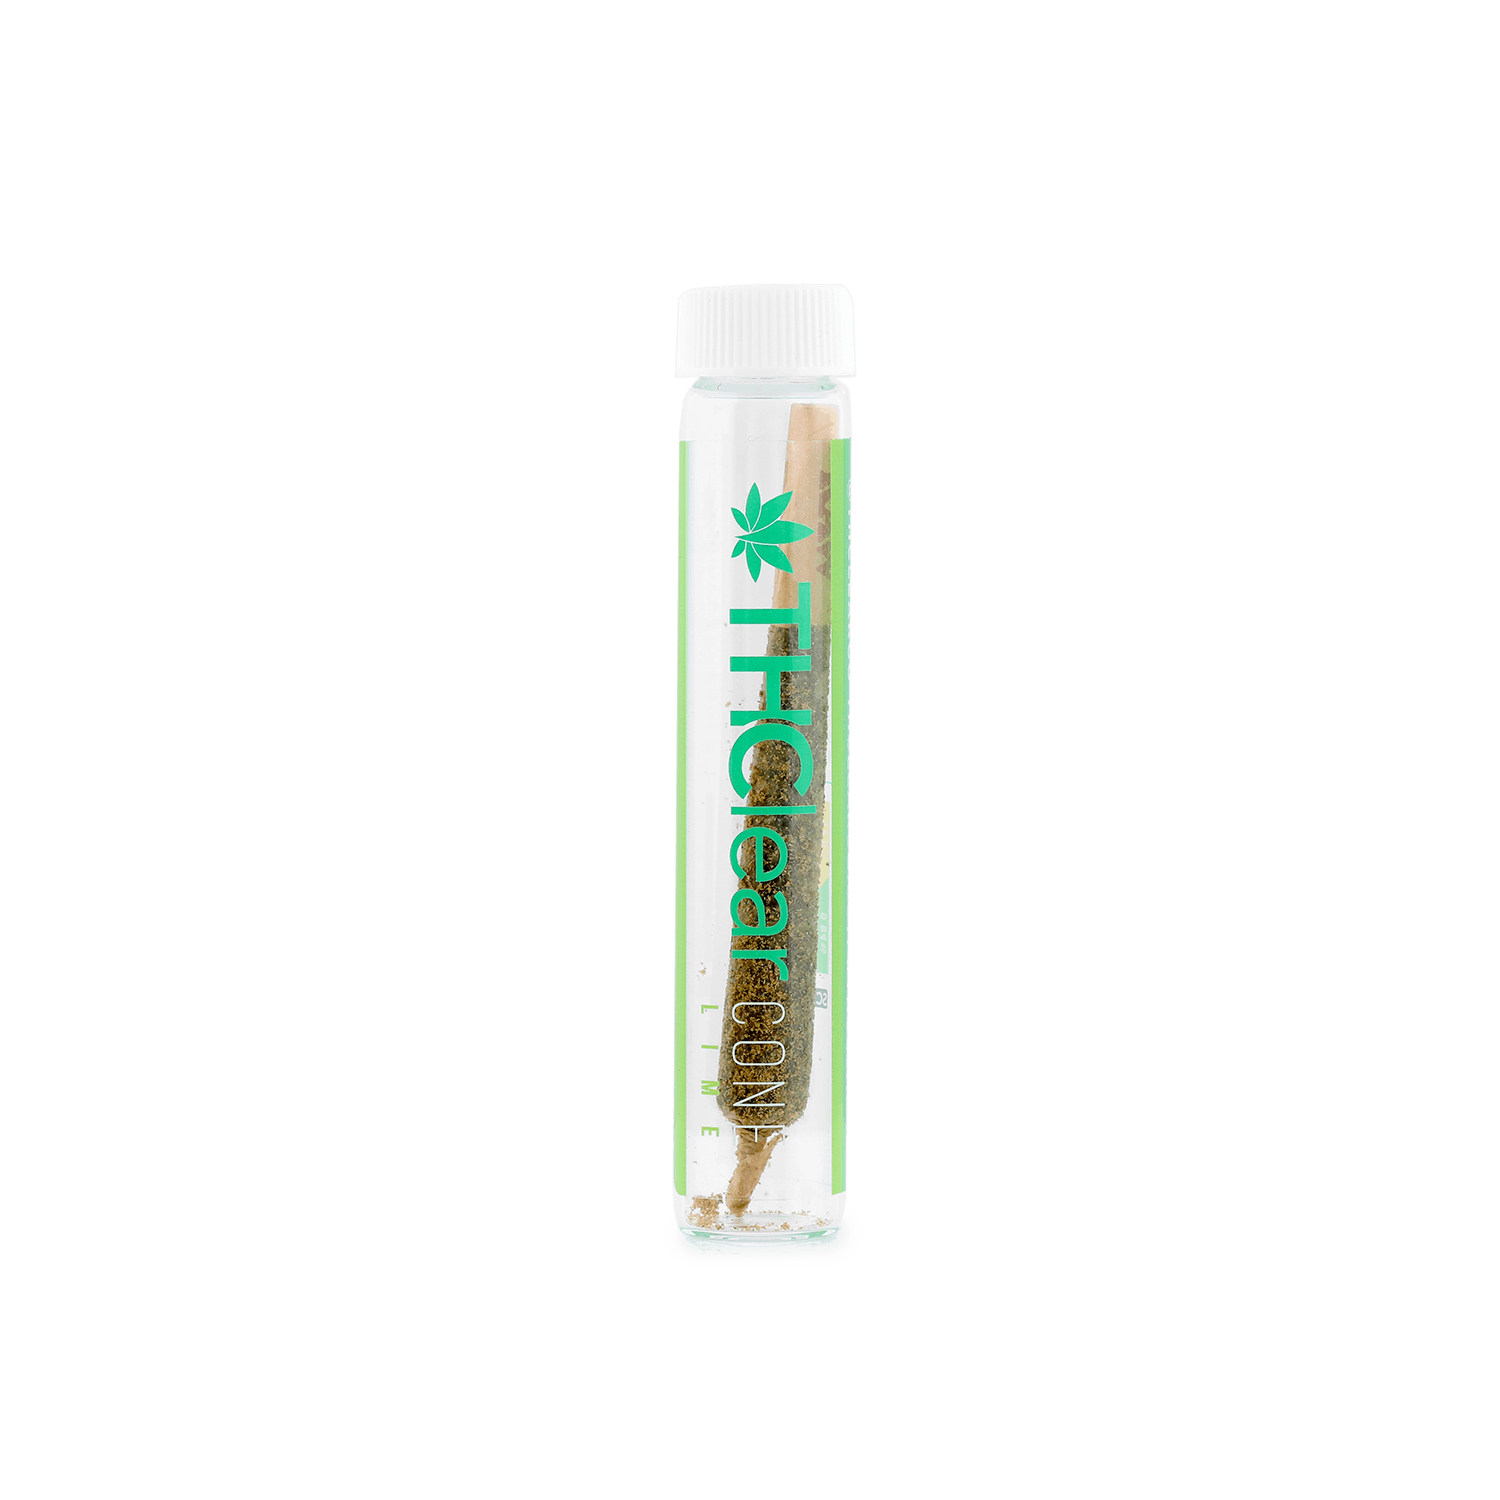 marijuana-dispensaries-holy-7th-heaven-in-los-angeles-pre-roll-cone-lime